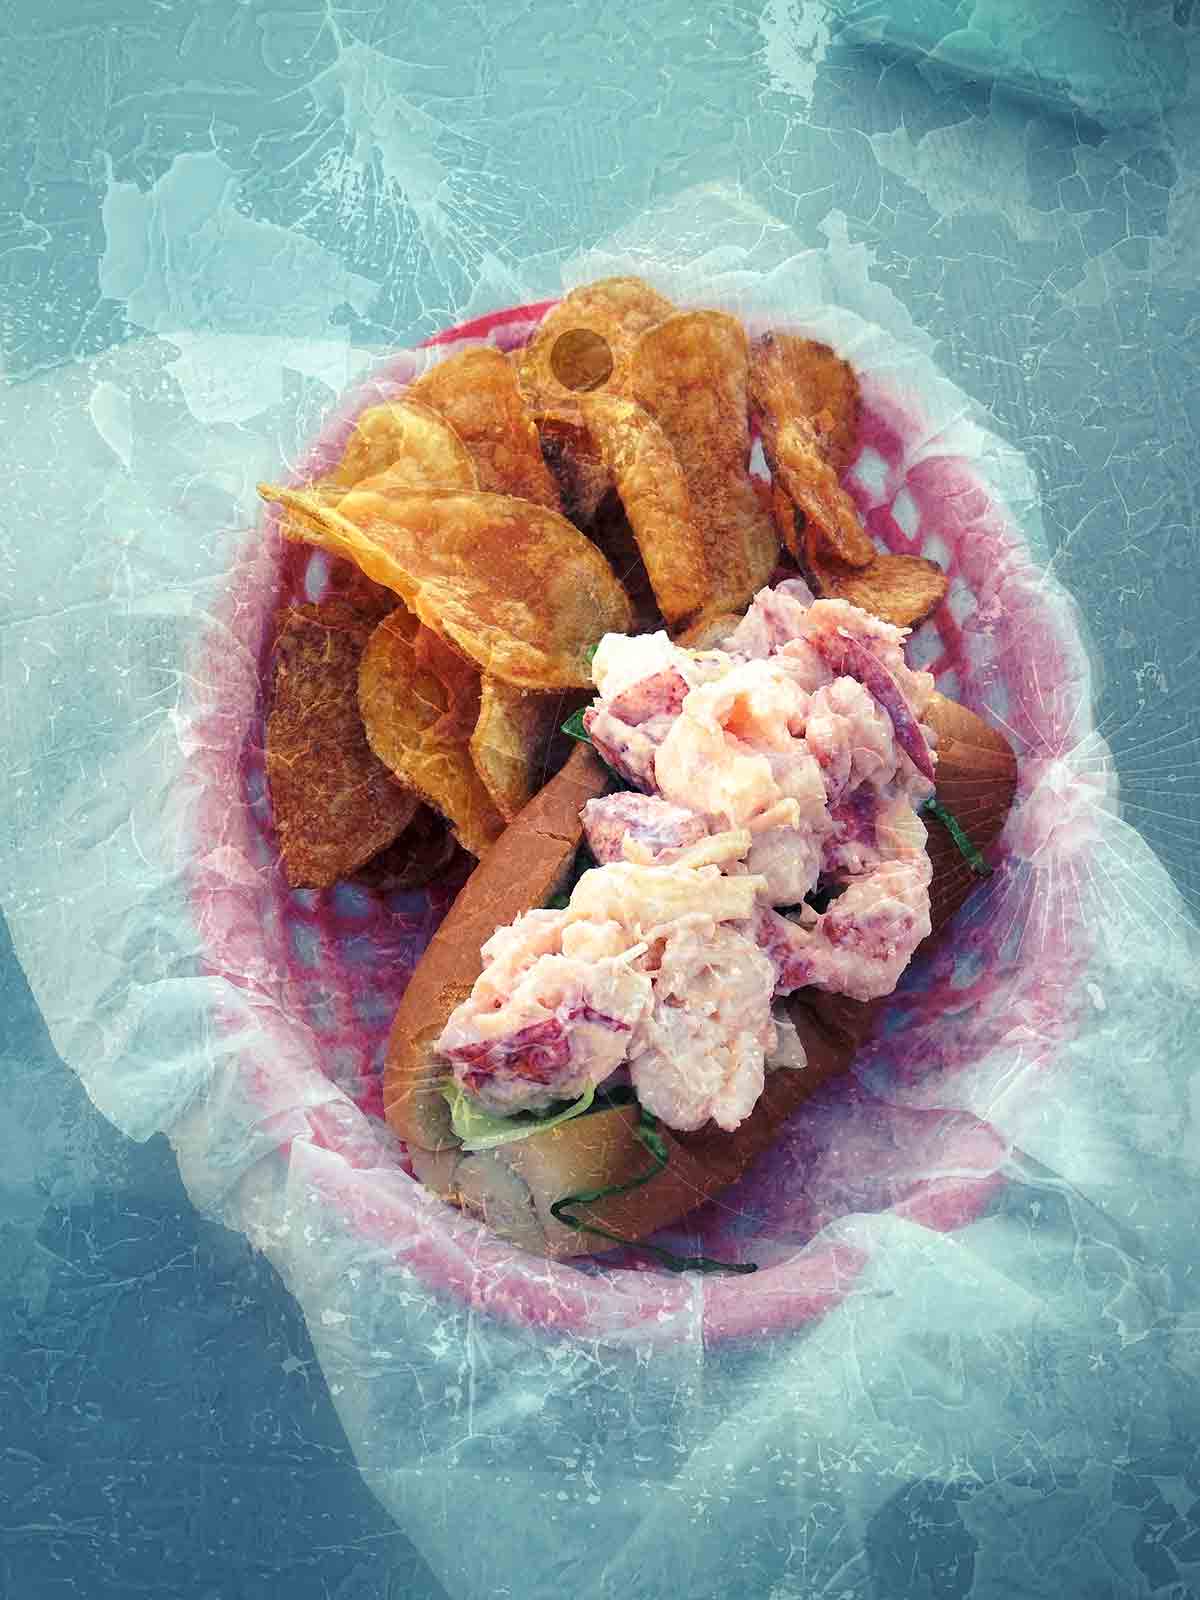 A lobster roll with mayonnaise and chips in a pink basket